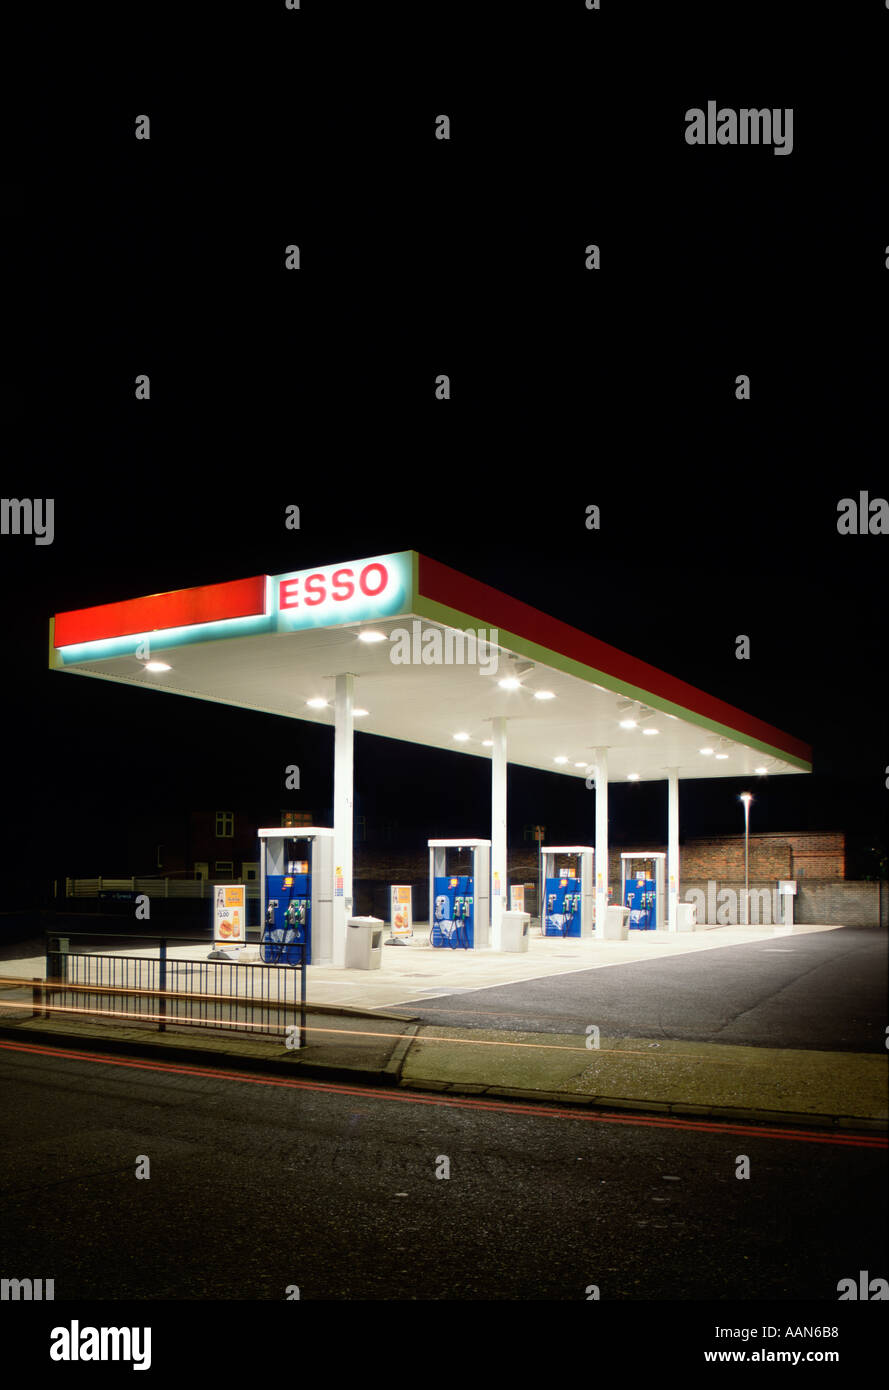 Esso Petrol Station by night near A3 road surrey england uk britain europe Stock Photo